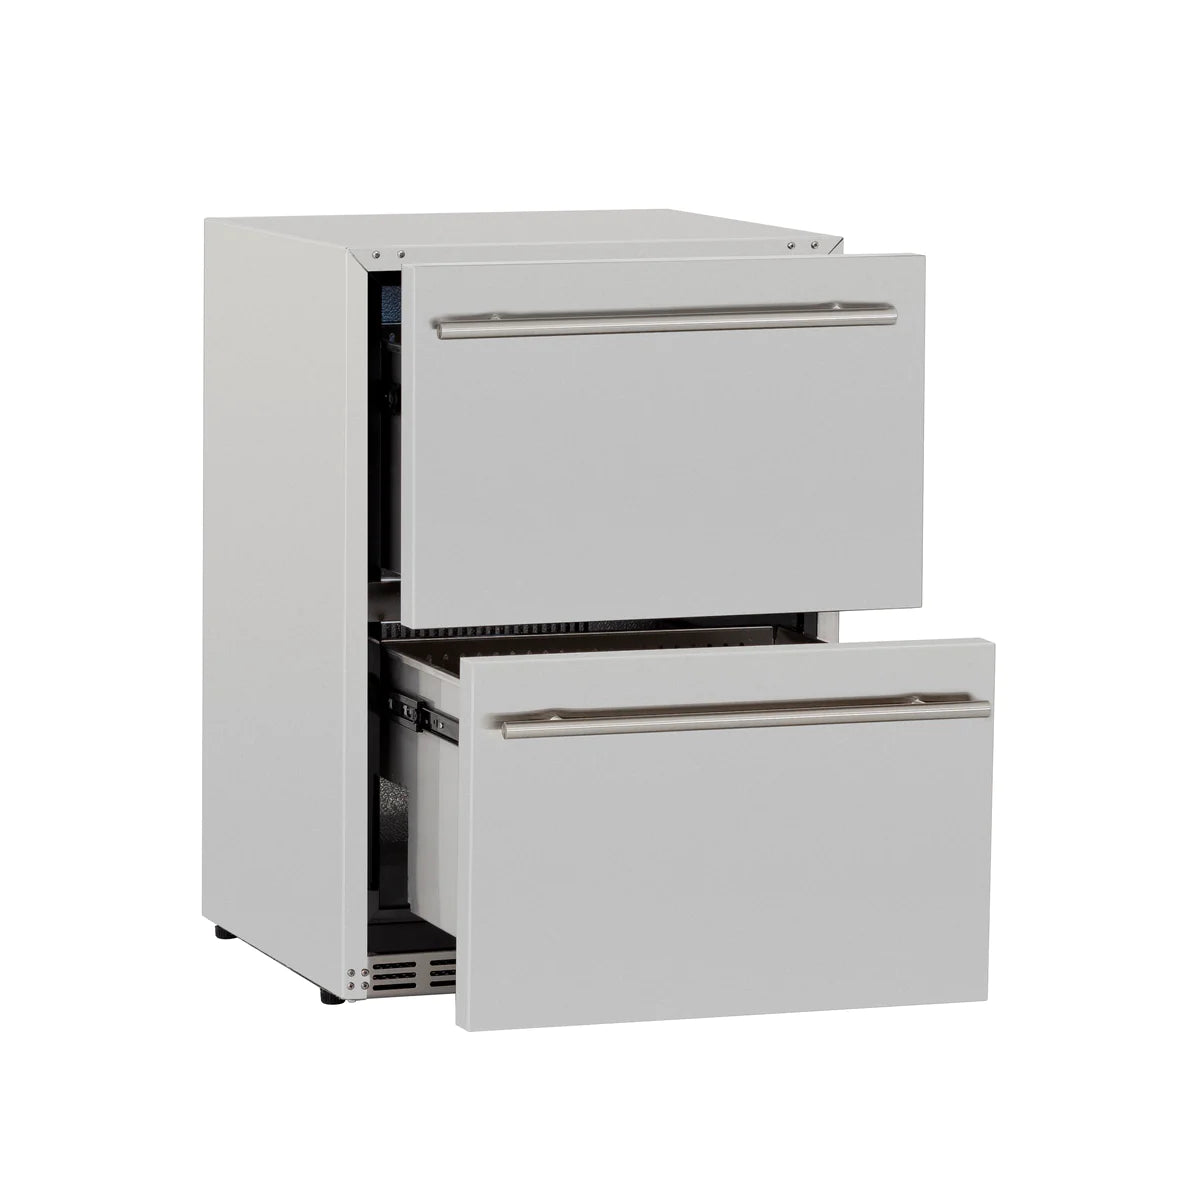 24" 5.3c Deluxe Outdoor Rated 2-Drawer Refrigerator